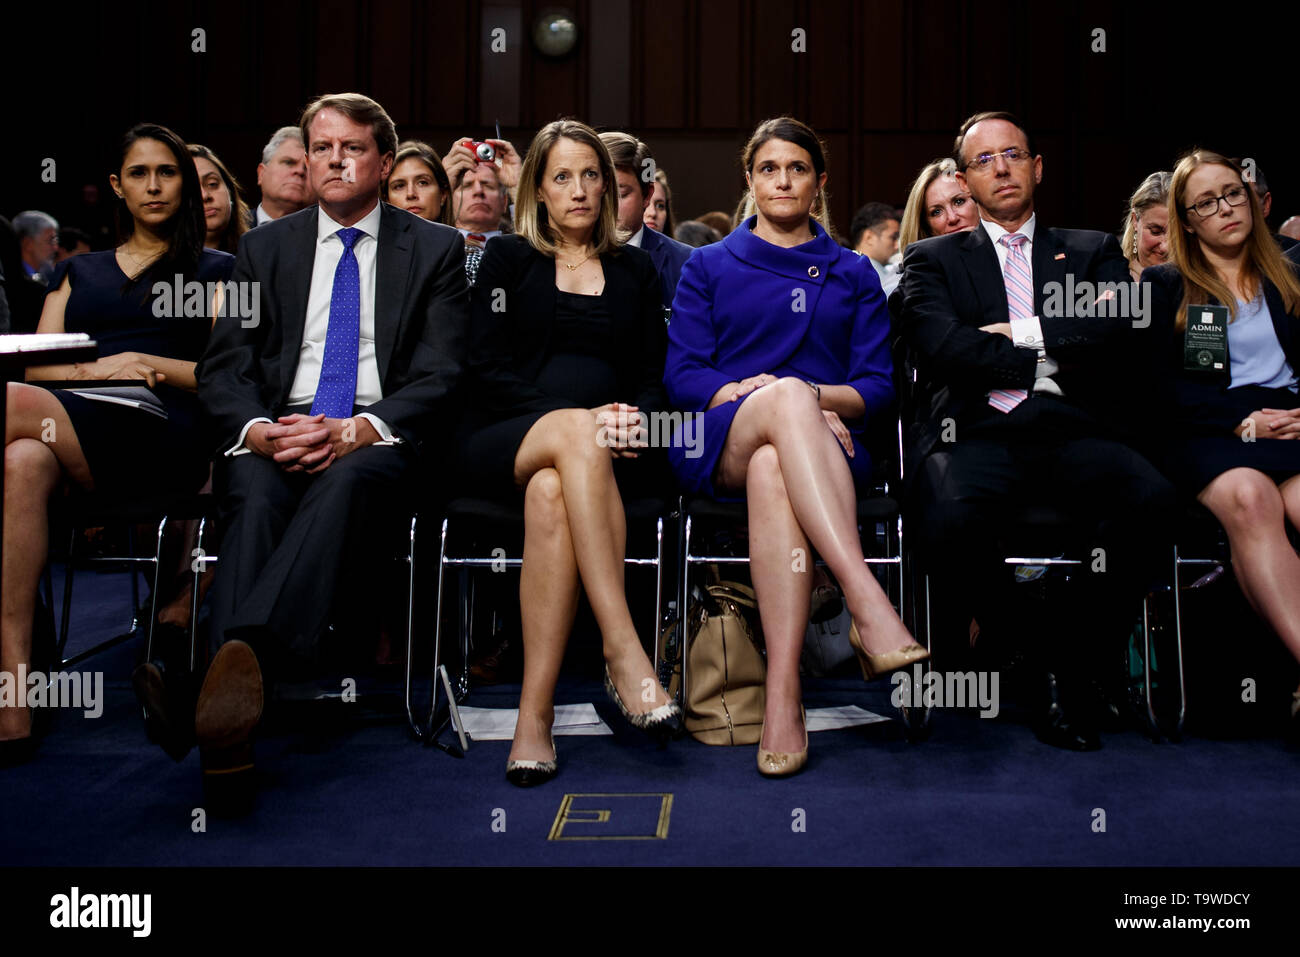 Washington, DC, USA. 4th Sep, 2018. Then White House counsel Don McGahn (front 2nd L) reacts in the audience during the confirmation hearing for Supreme Court Justice nominee Brett Kavanaugh before the U.S. Senate Judiciary Committee on Capitol Hill in Washington, DC, the United States, on Sept. 4, 2018. The White House on Monday instructed former counsel Don McGahn to defy a congressional subpoena and skip a hearing scheduled for Tuesday relating to the Russia probe. Credit: Ting Shen/Xinhua/Alamy Live News Stock Photo